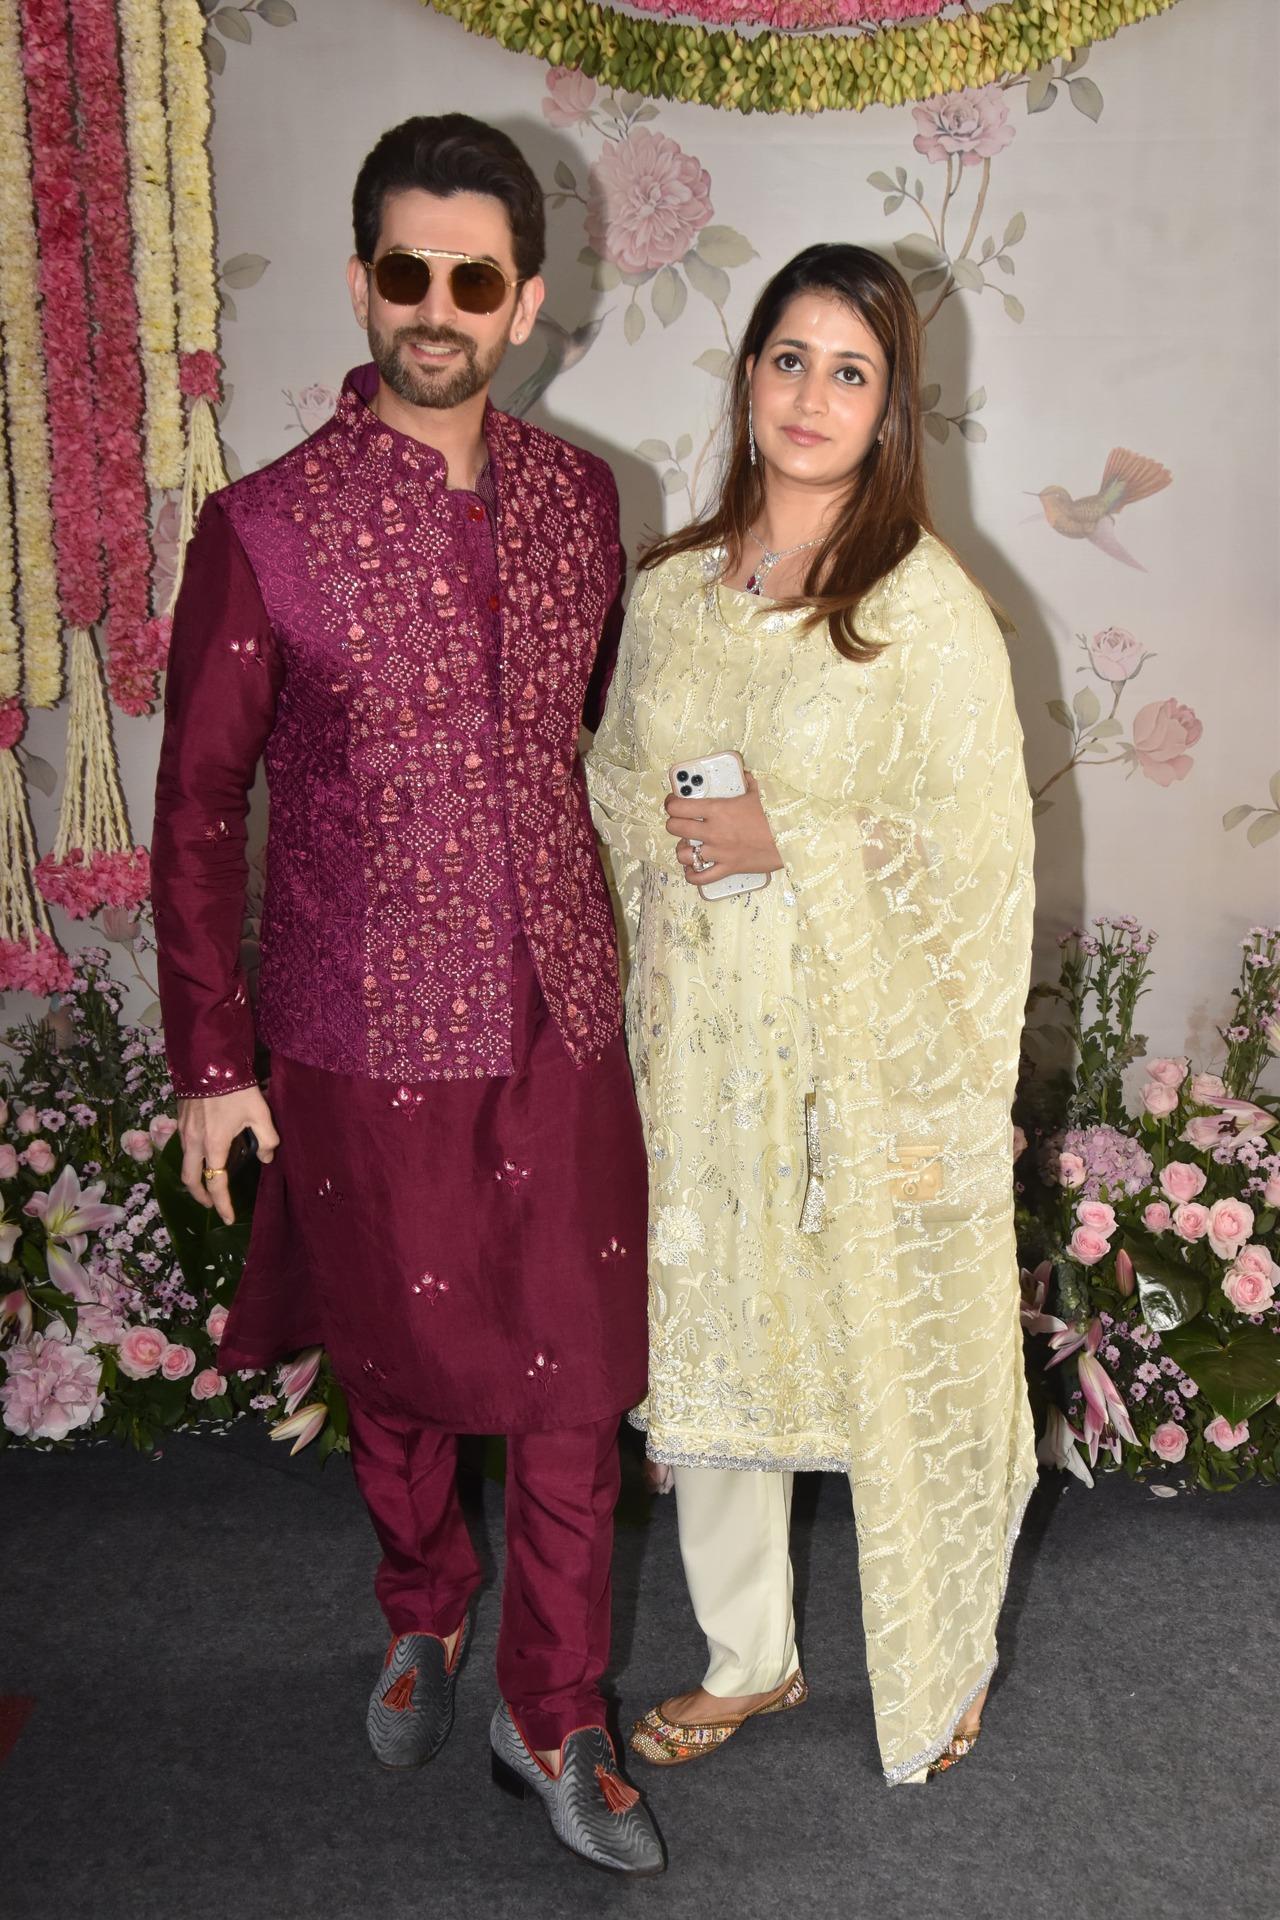 Neil Nitin Mukesh also went with his wife, to be a part of Arpita's Ganpati celebration